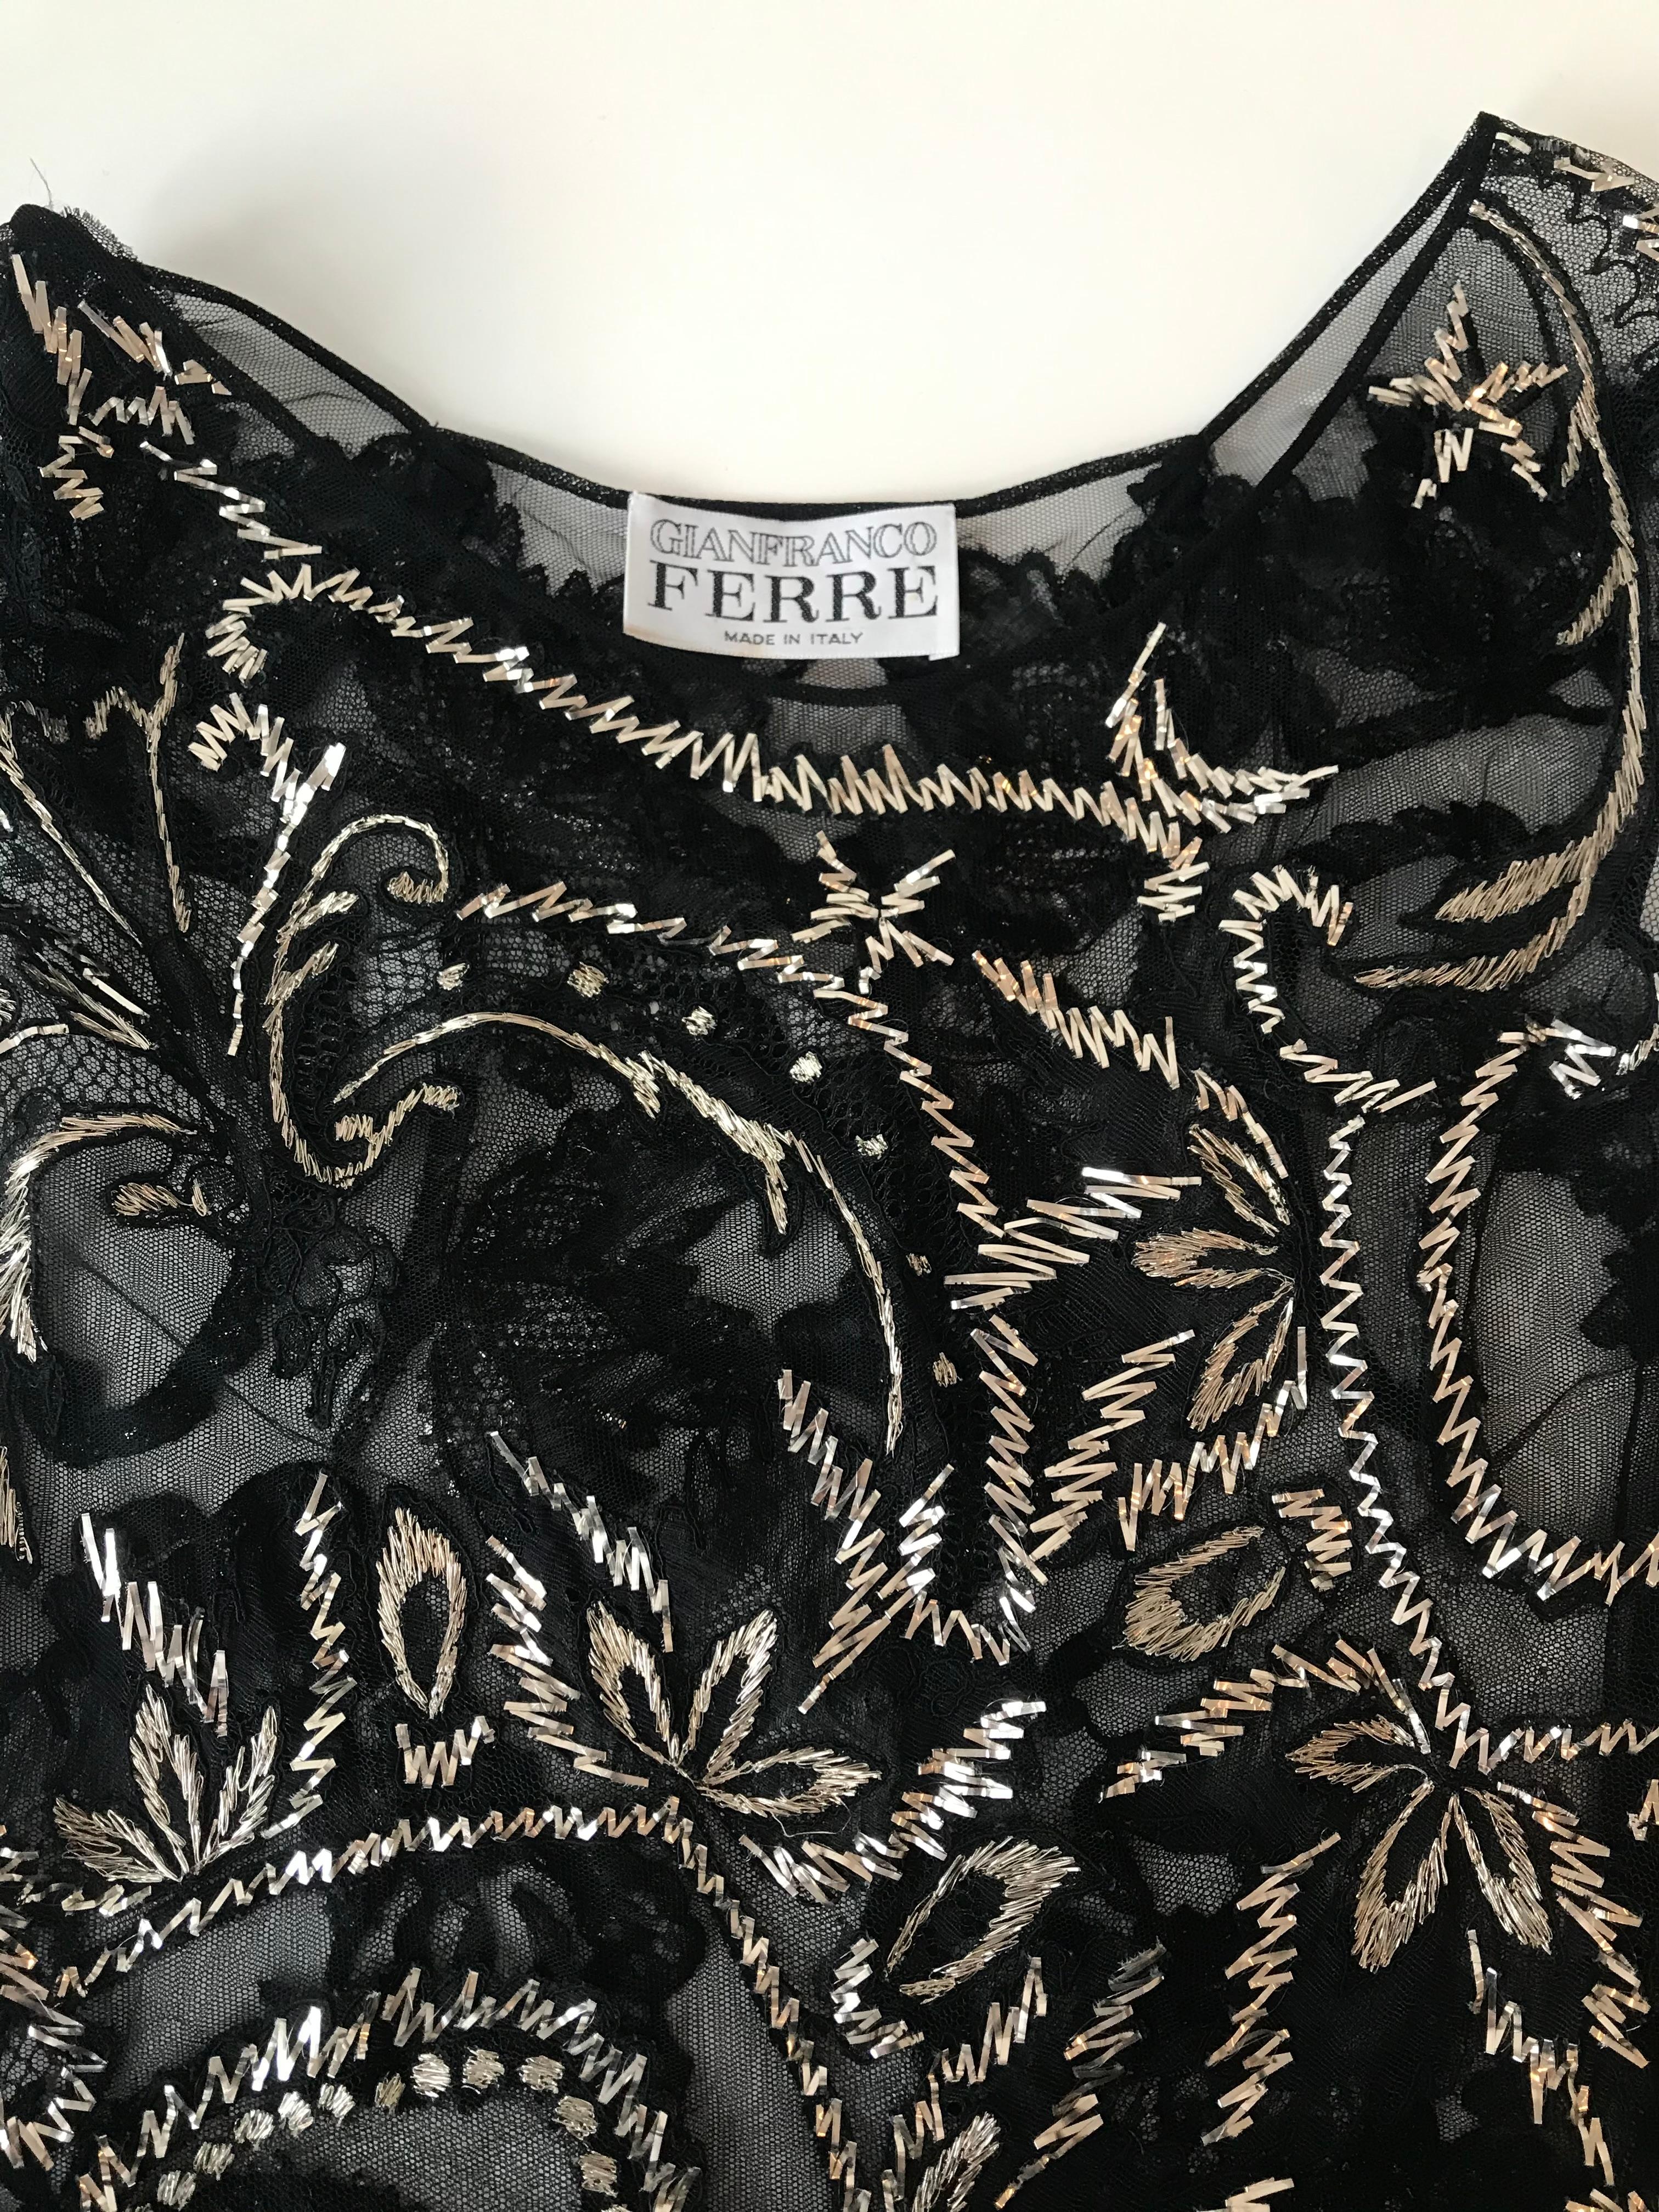 FW 1998 Gianfranco Ferre Metallic Embroidered Tulle Evening Gown For Sale 14